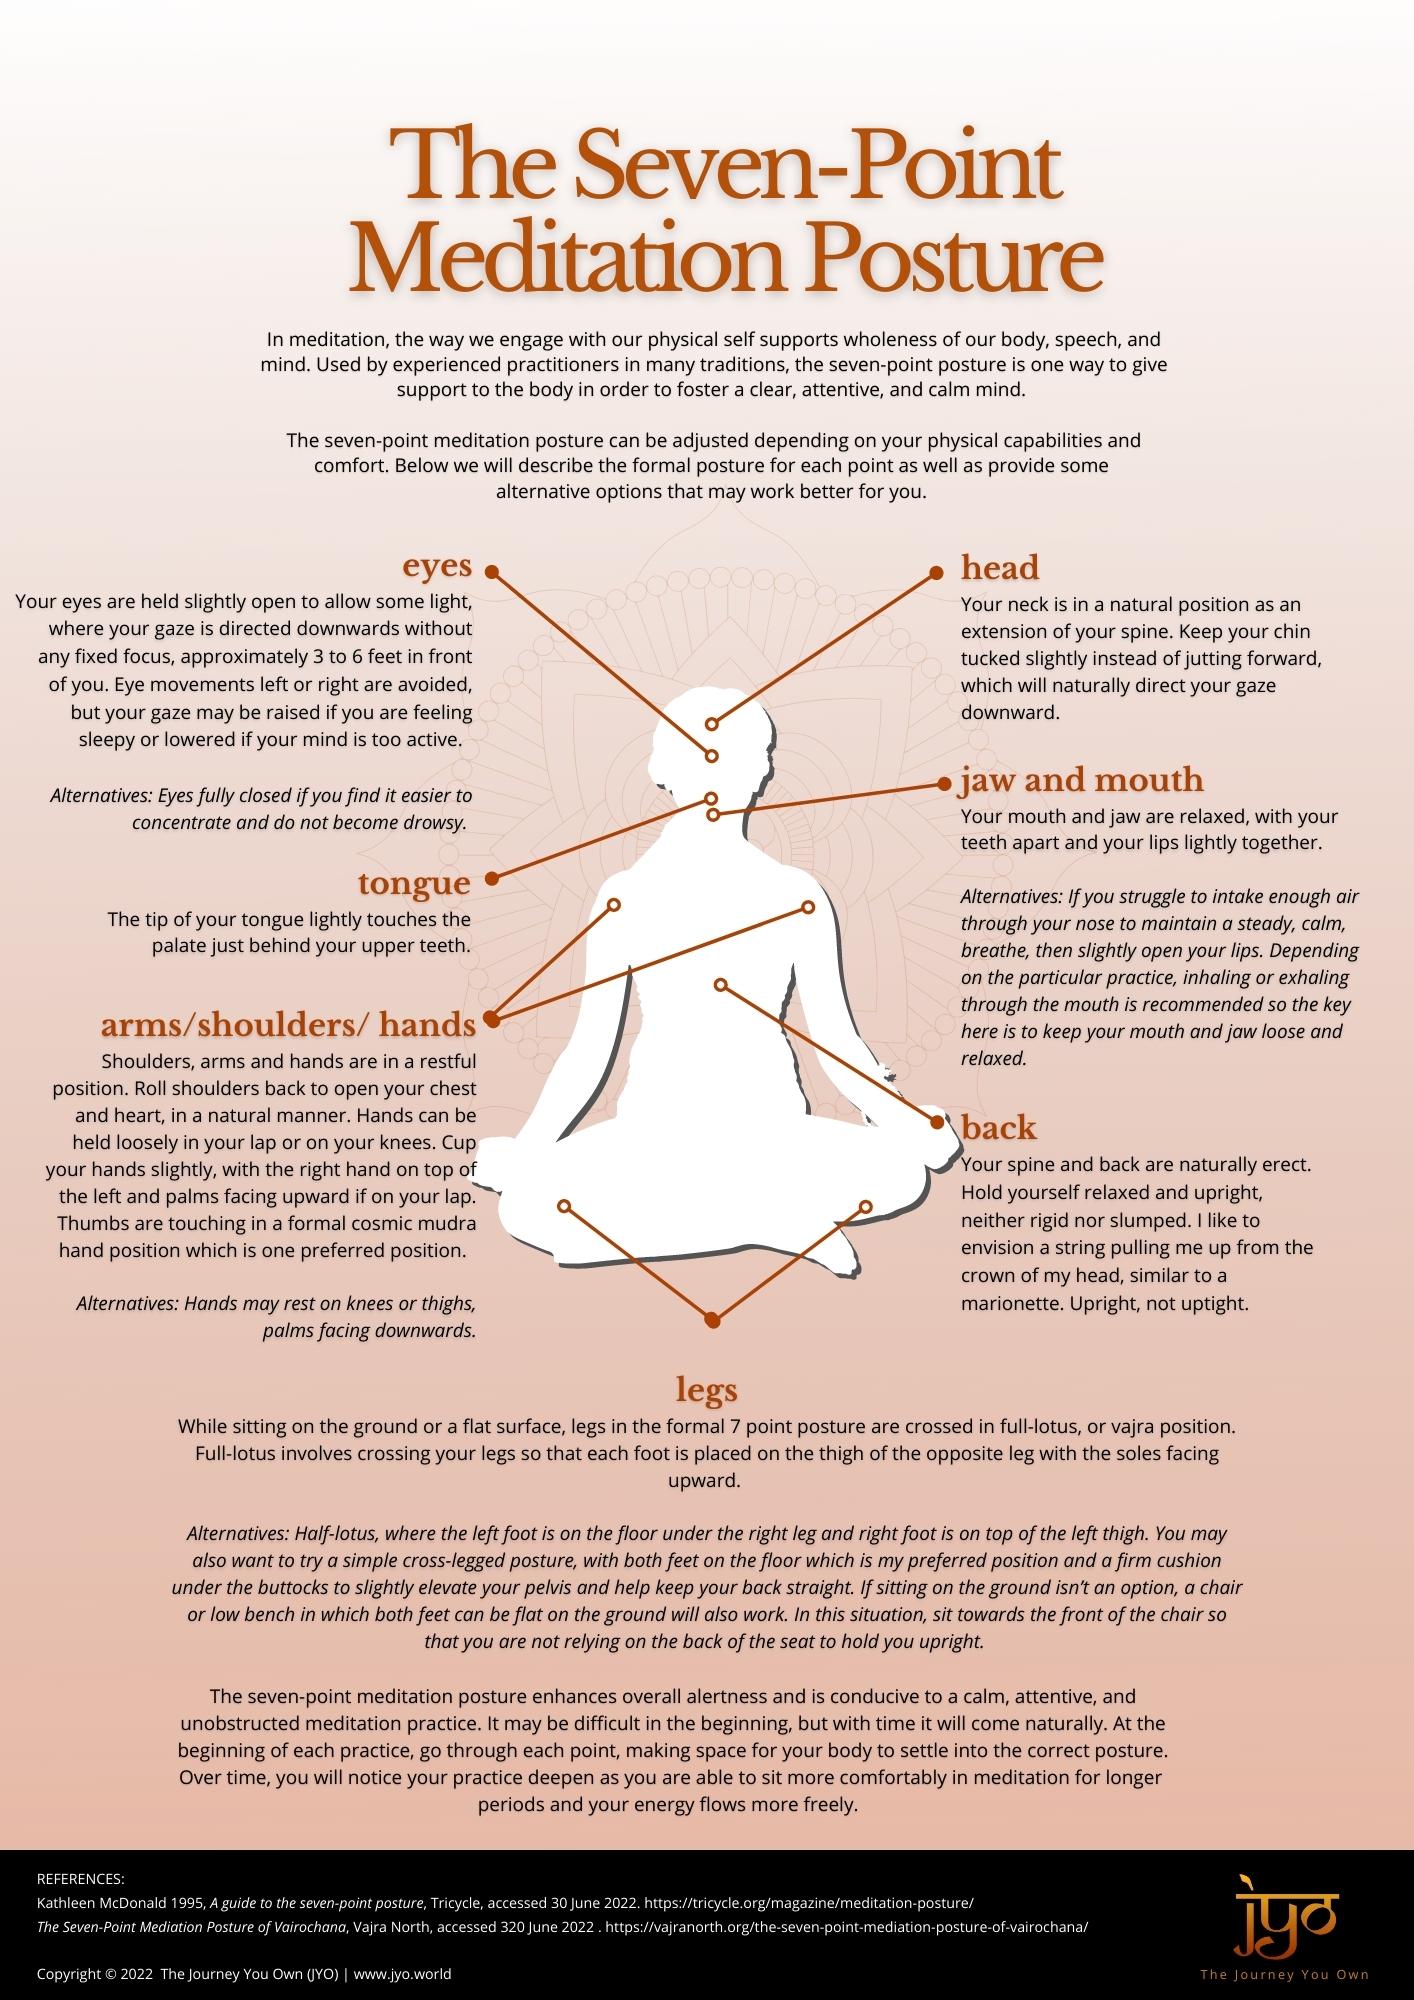 Seven-Point Meditation Posture - The Journey You Own (JYO)